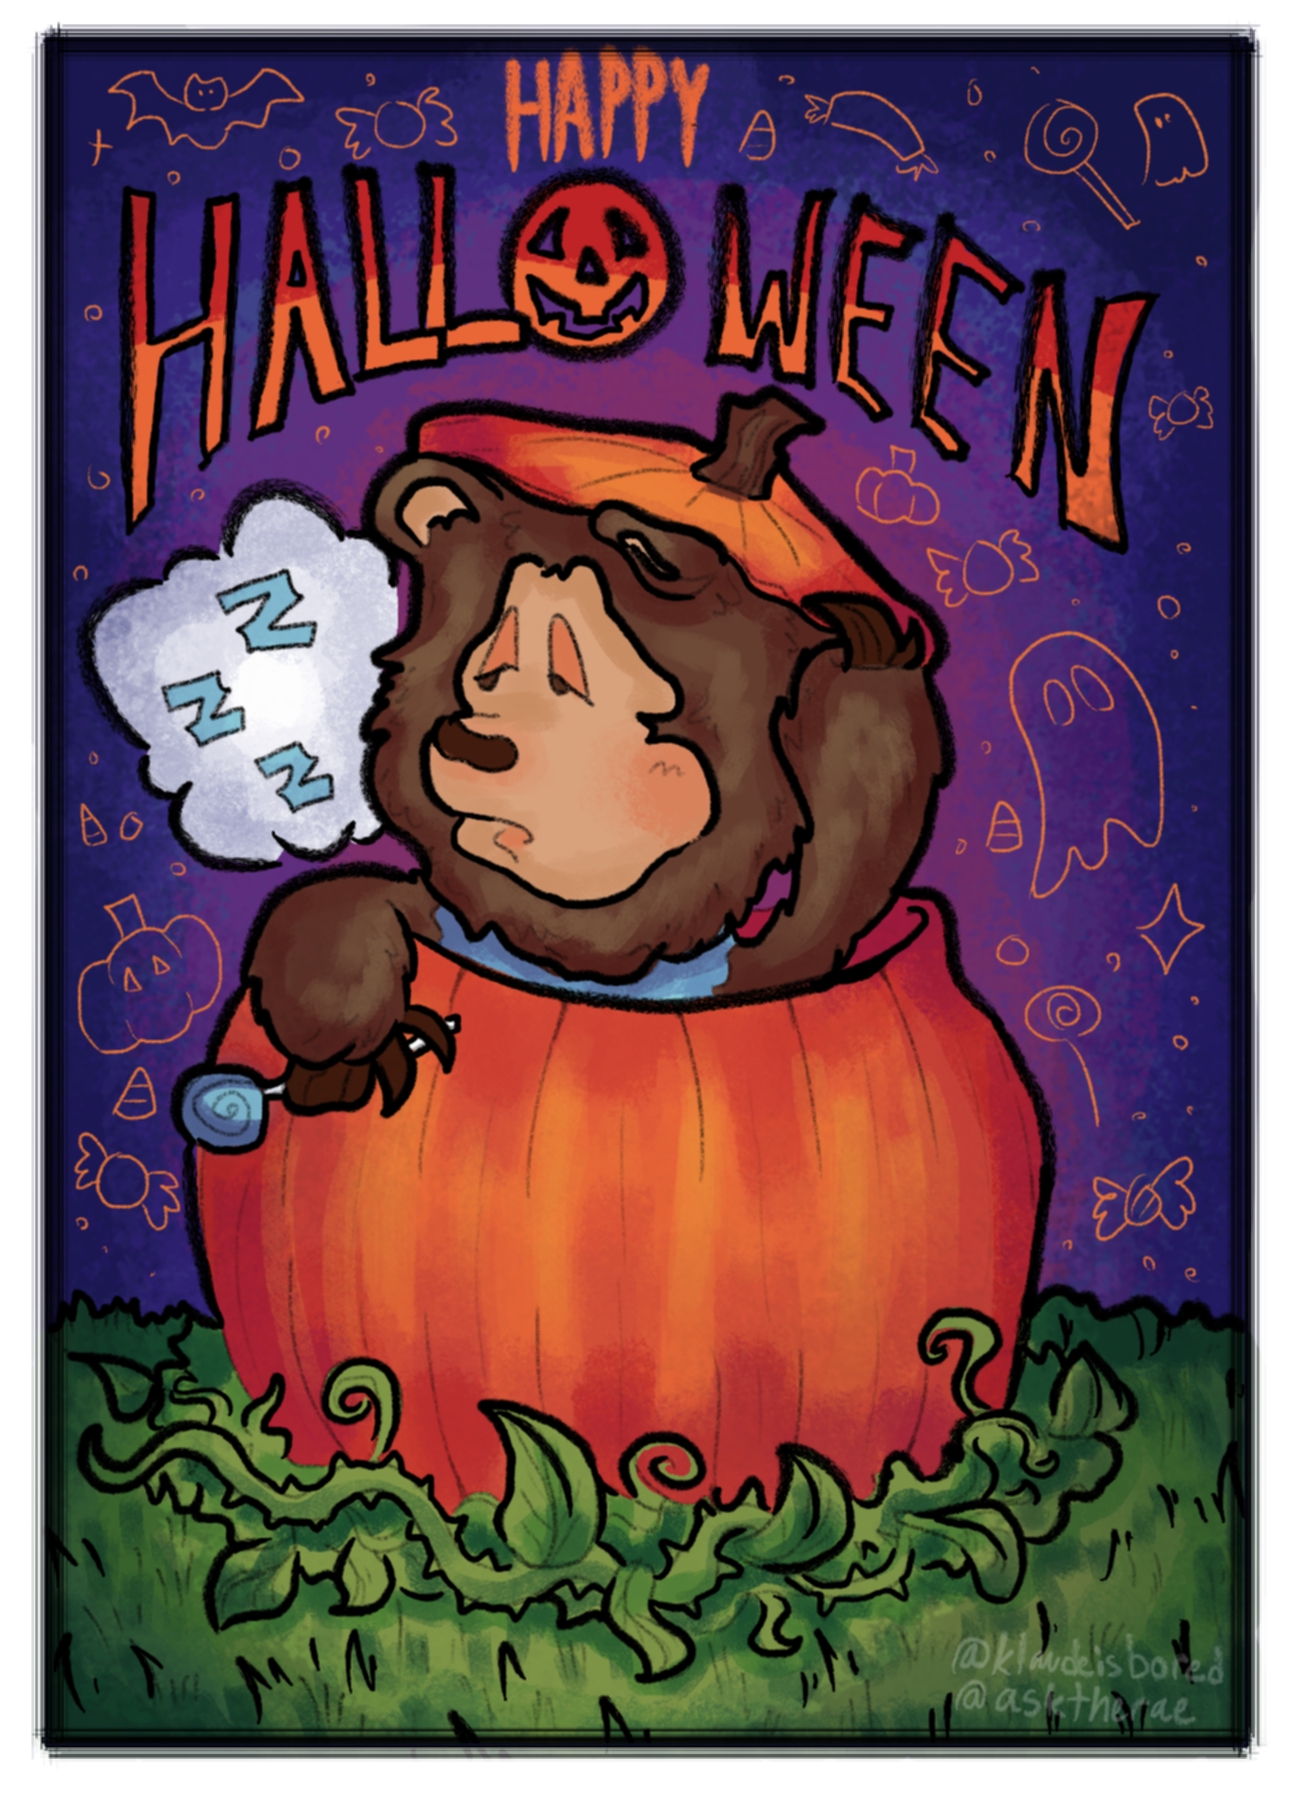 A digital drawing of Choo Choo (a baby cub black bear) peering out from a pumpkin sleepily. There are three z's in a sleepy bubble next to him, and the pumpkin is sitting on a bed of green foliage. The background is various shades of purple and indigo, with orange doodles of ghosts, candy, and pumpkins on top of it. Orange text above the drawing says 'HAPPY HALLOWEEN'